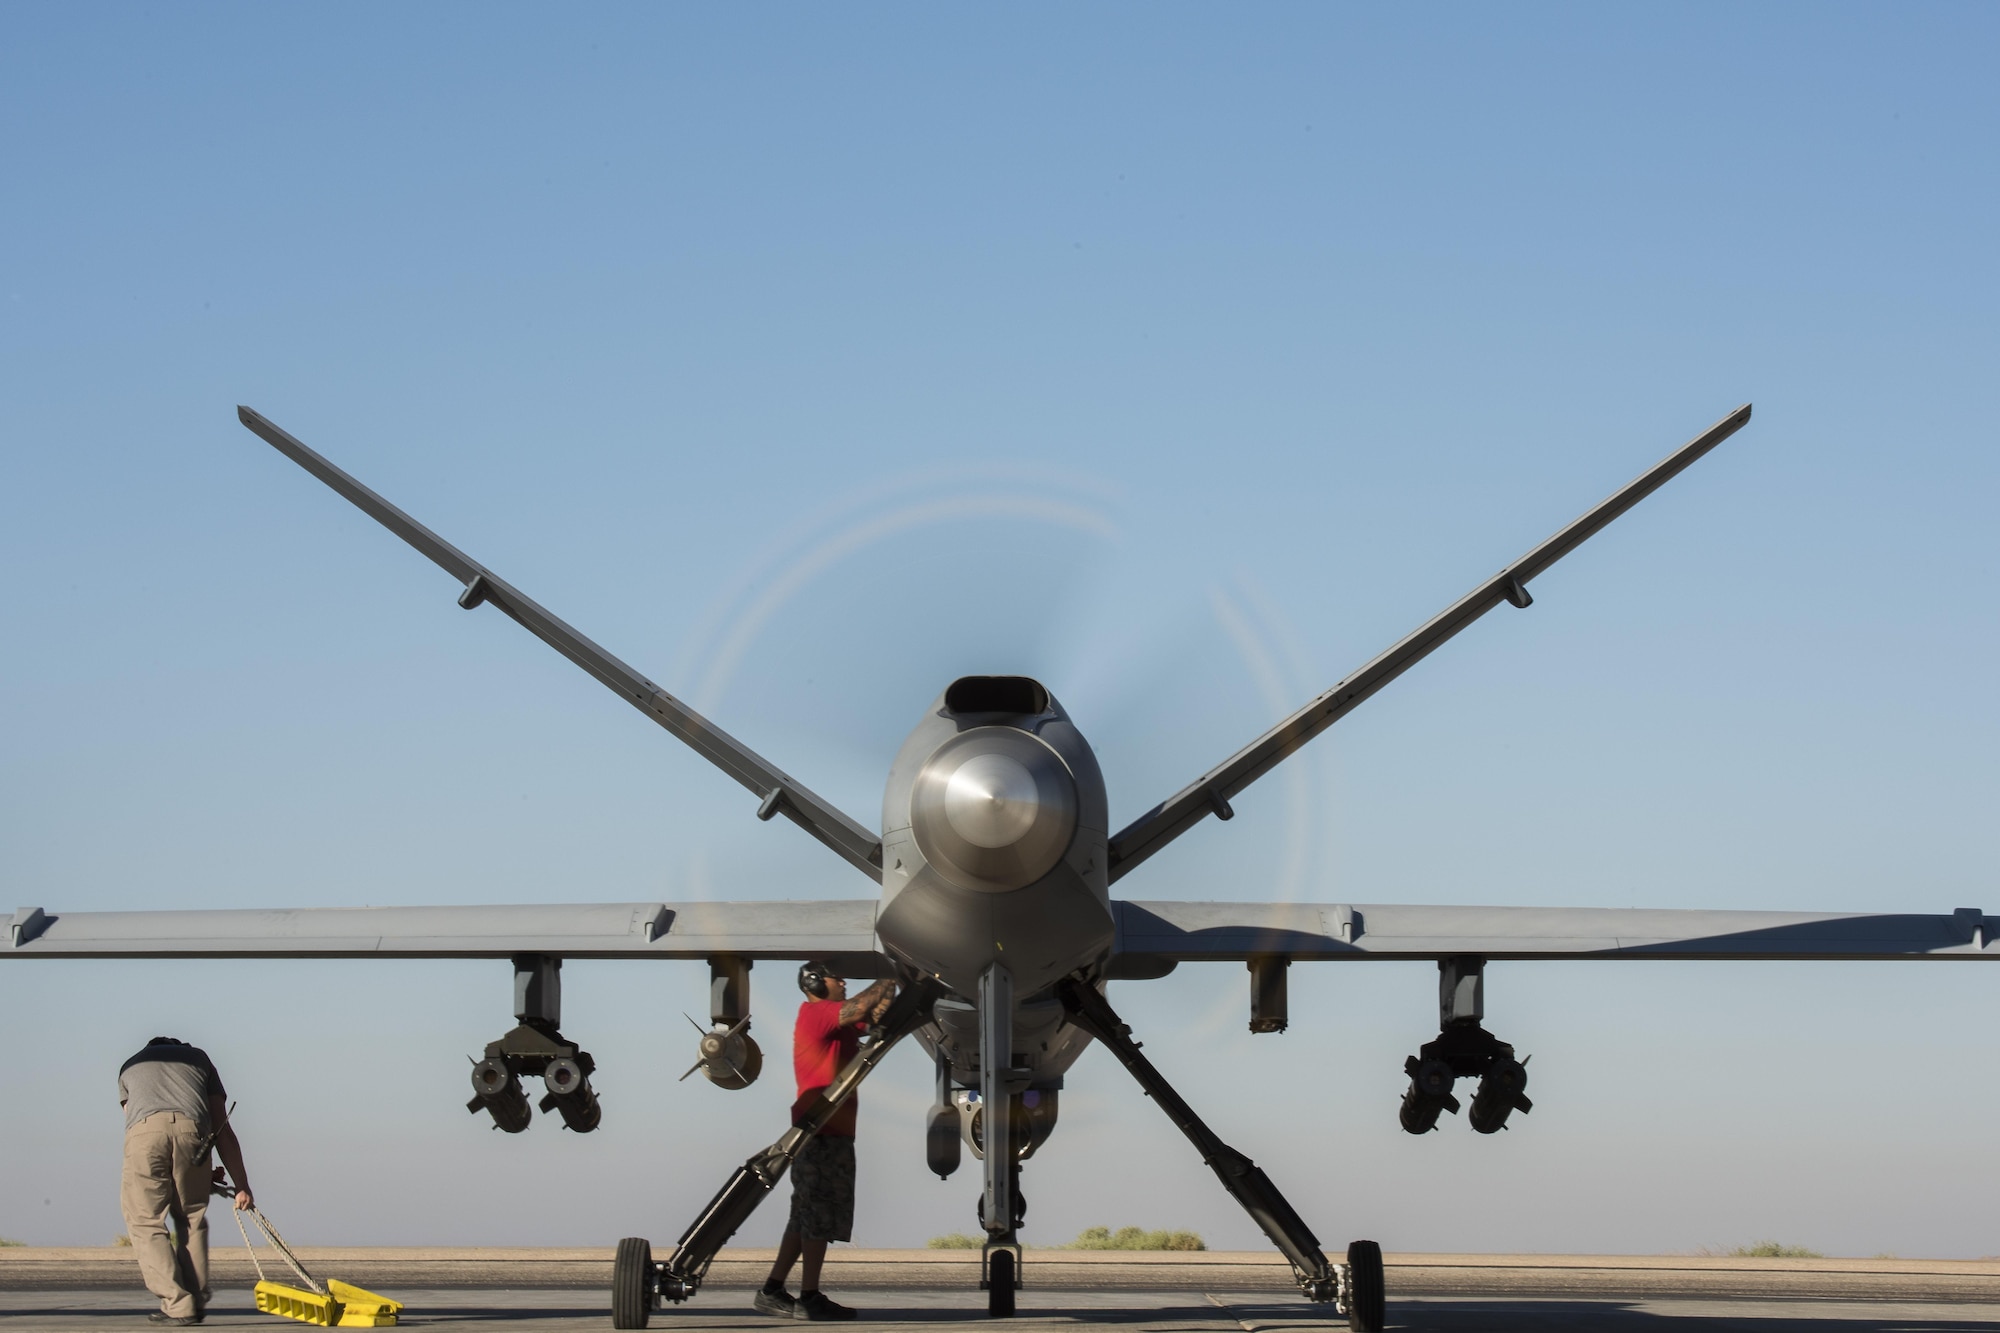 Maintainers perform final preflight procedures prior to a MQ-9 Reaper, Block 5 variant, taking off June 23, 2017, in Southwest Asia. This marked the block’s first combat flight in support of Operation Inherent Resolve. (U.S. Air Force photo/Senior Airman Damon Kasberg)